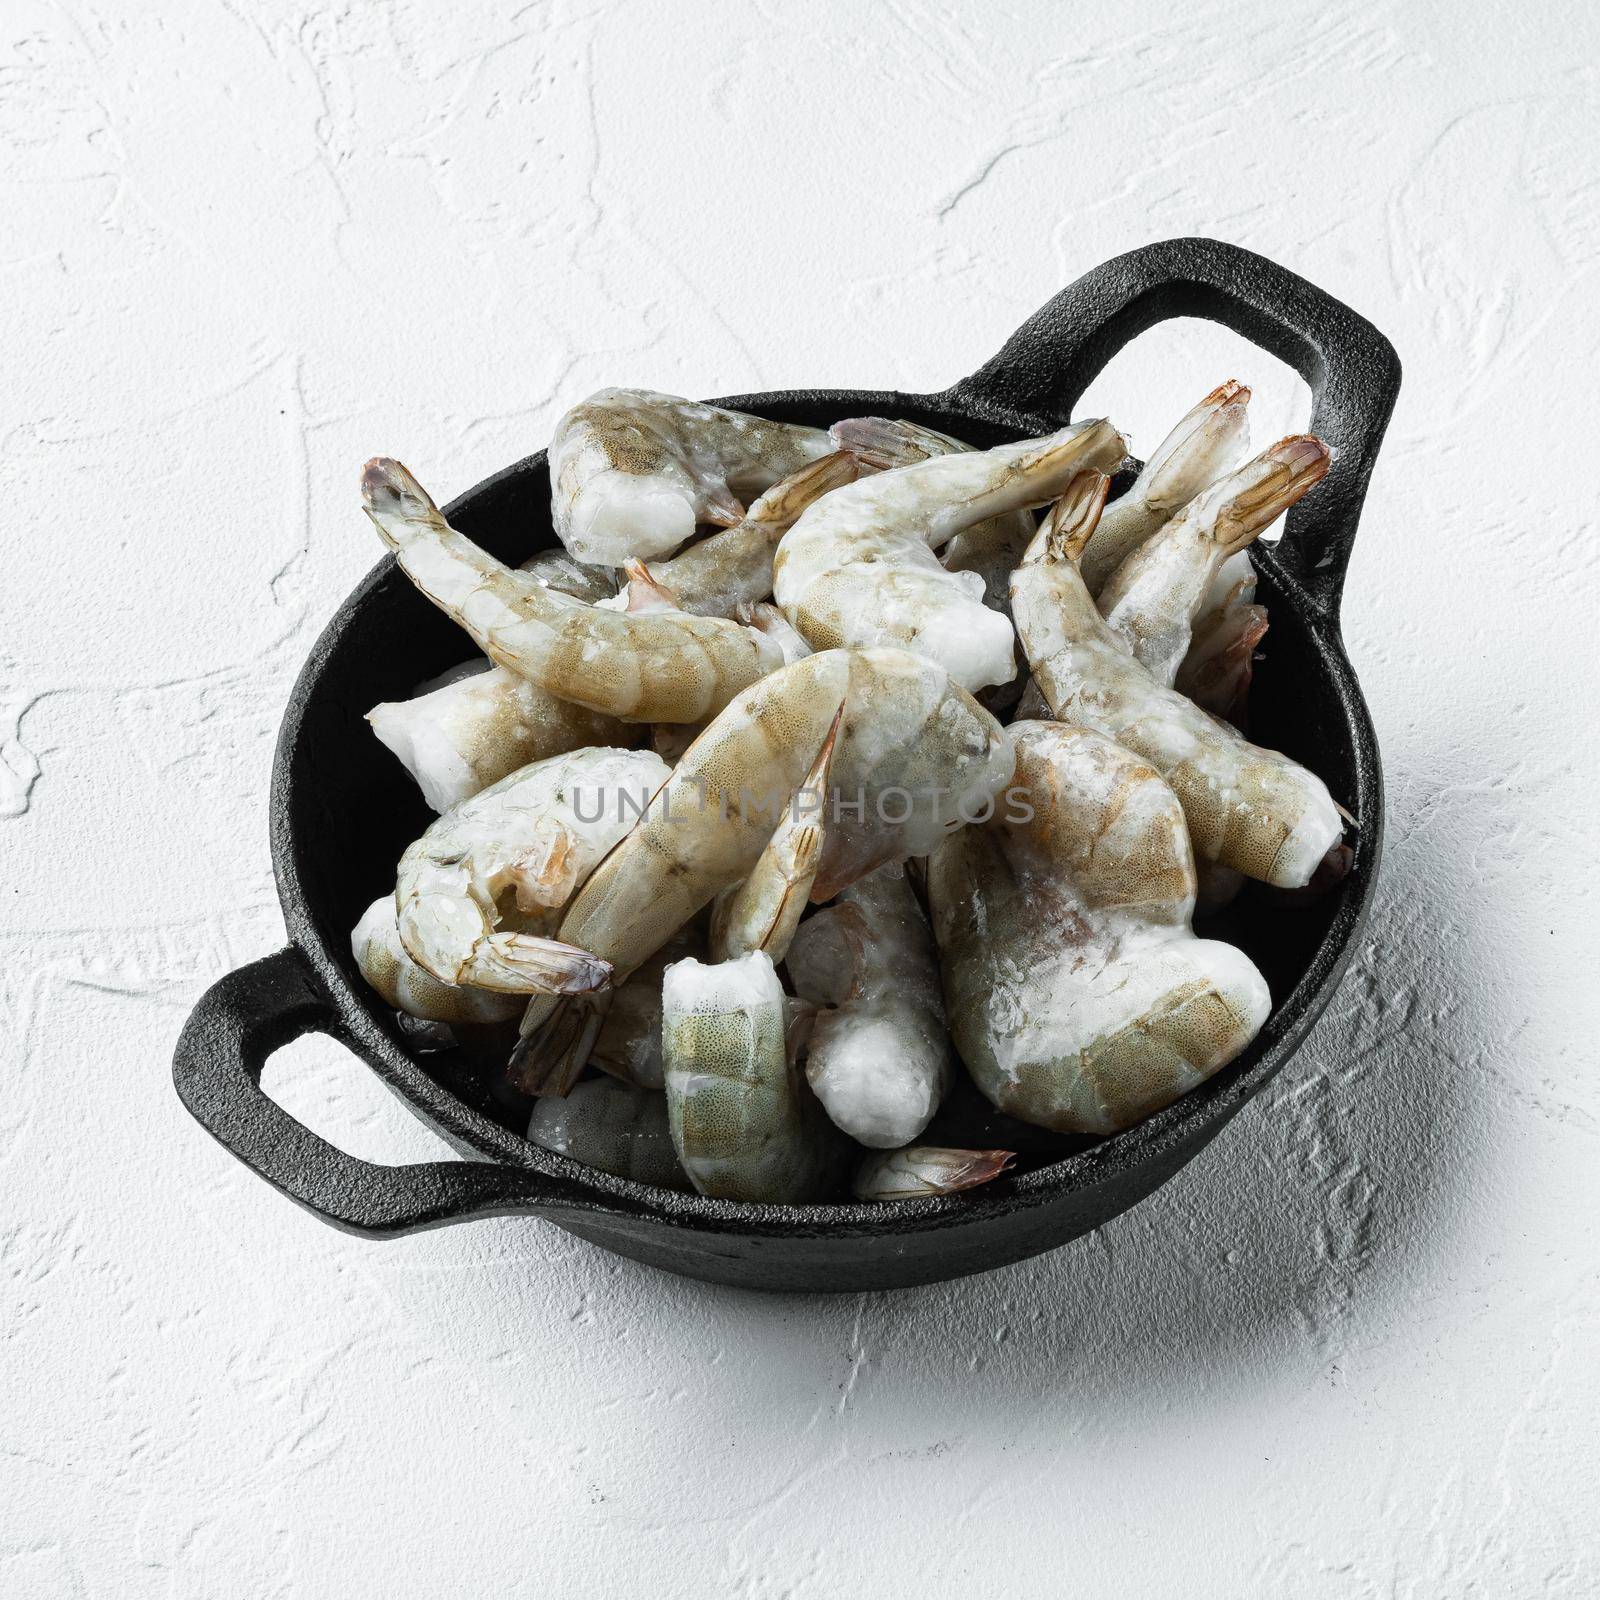 Frozen shell on Tiger Prawns or Asian tiger Shrimps, on white stone surface, square format by Ilianesolenyi